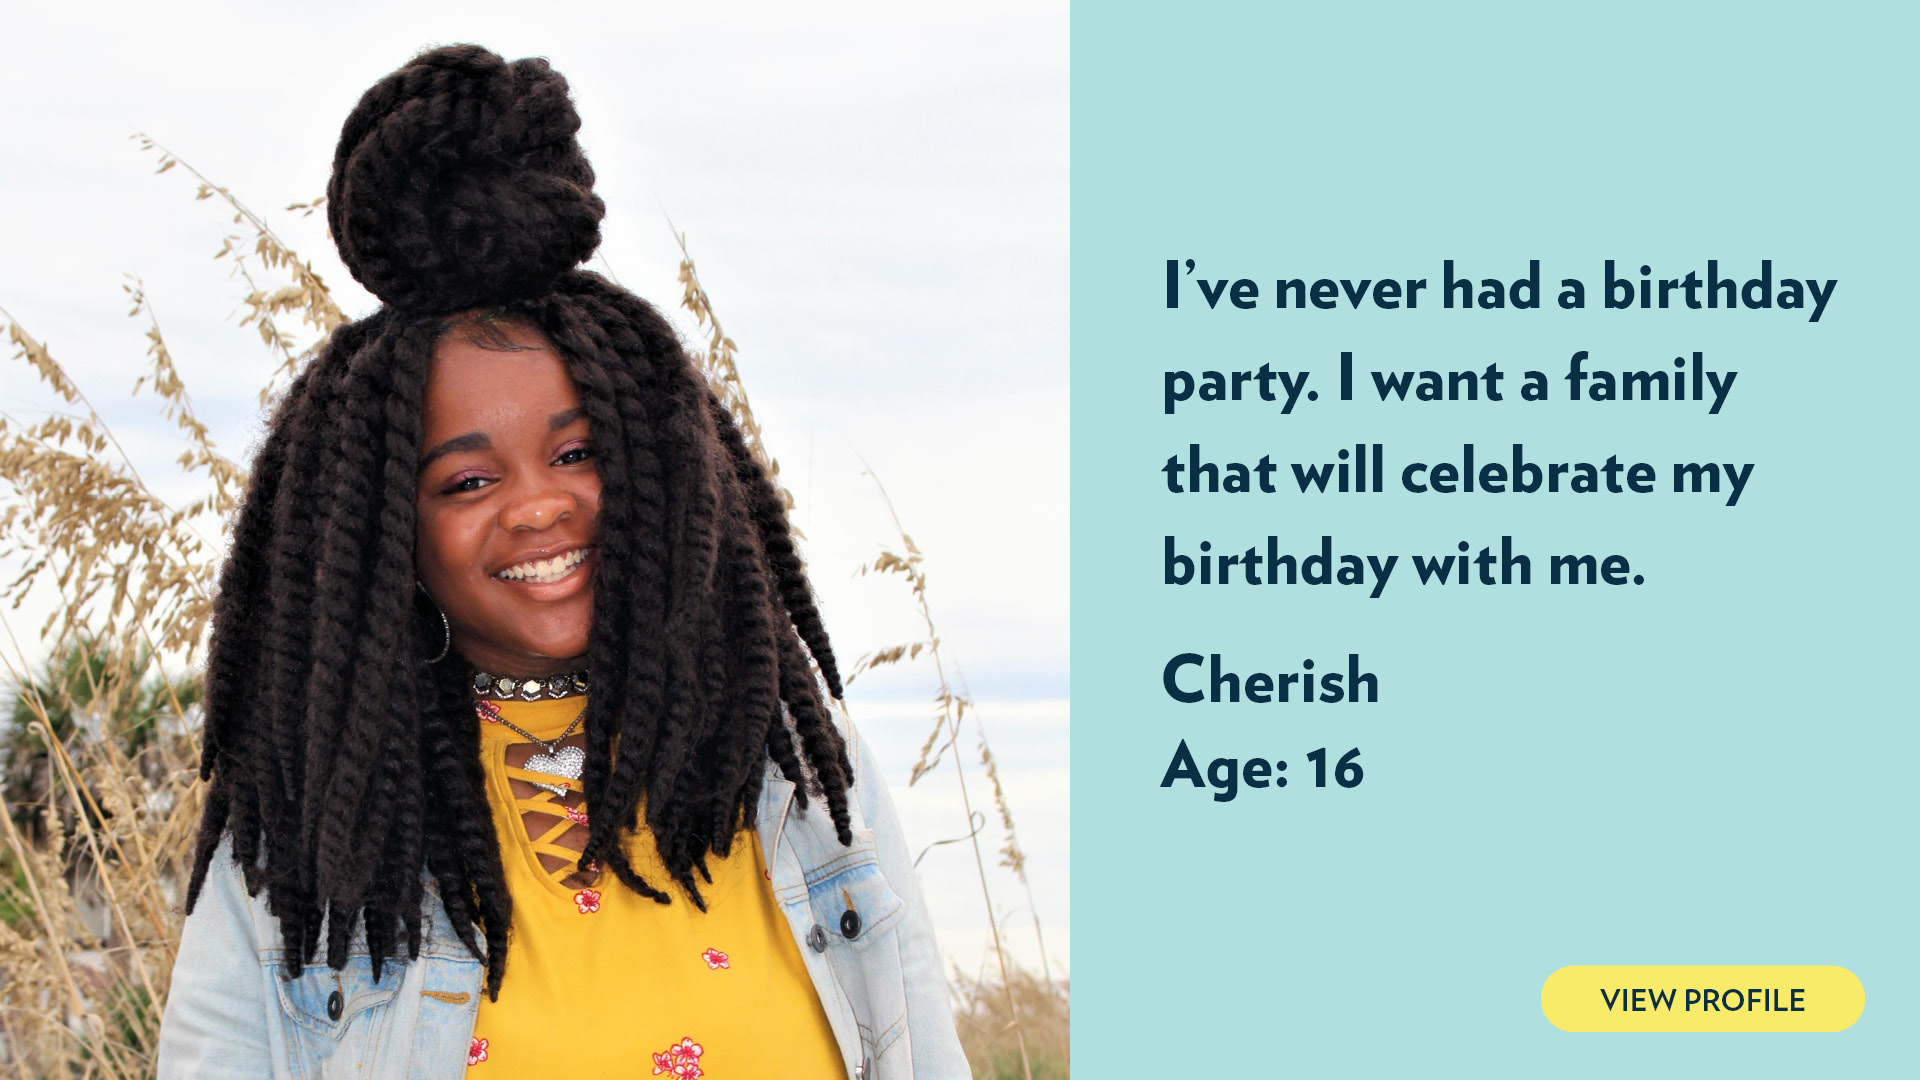 Cherish, age 16. I’ve never had a birthday party. I want a family that will celebrate my birthday with me. View profile.